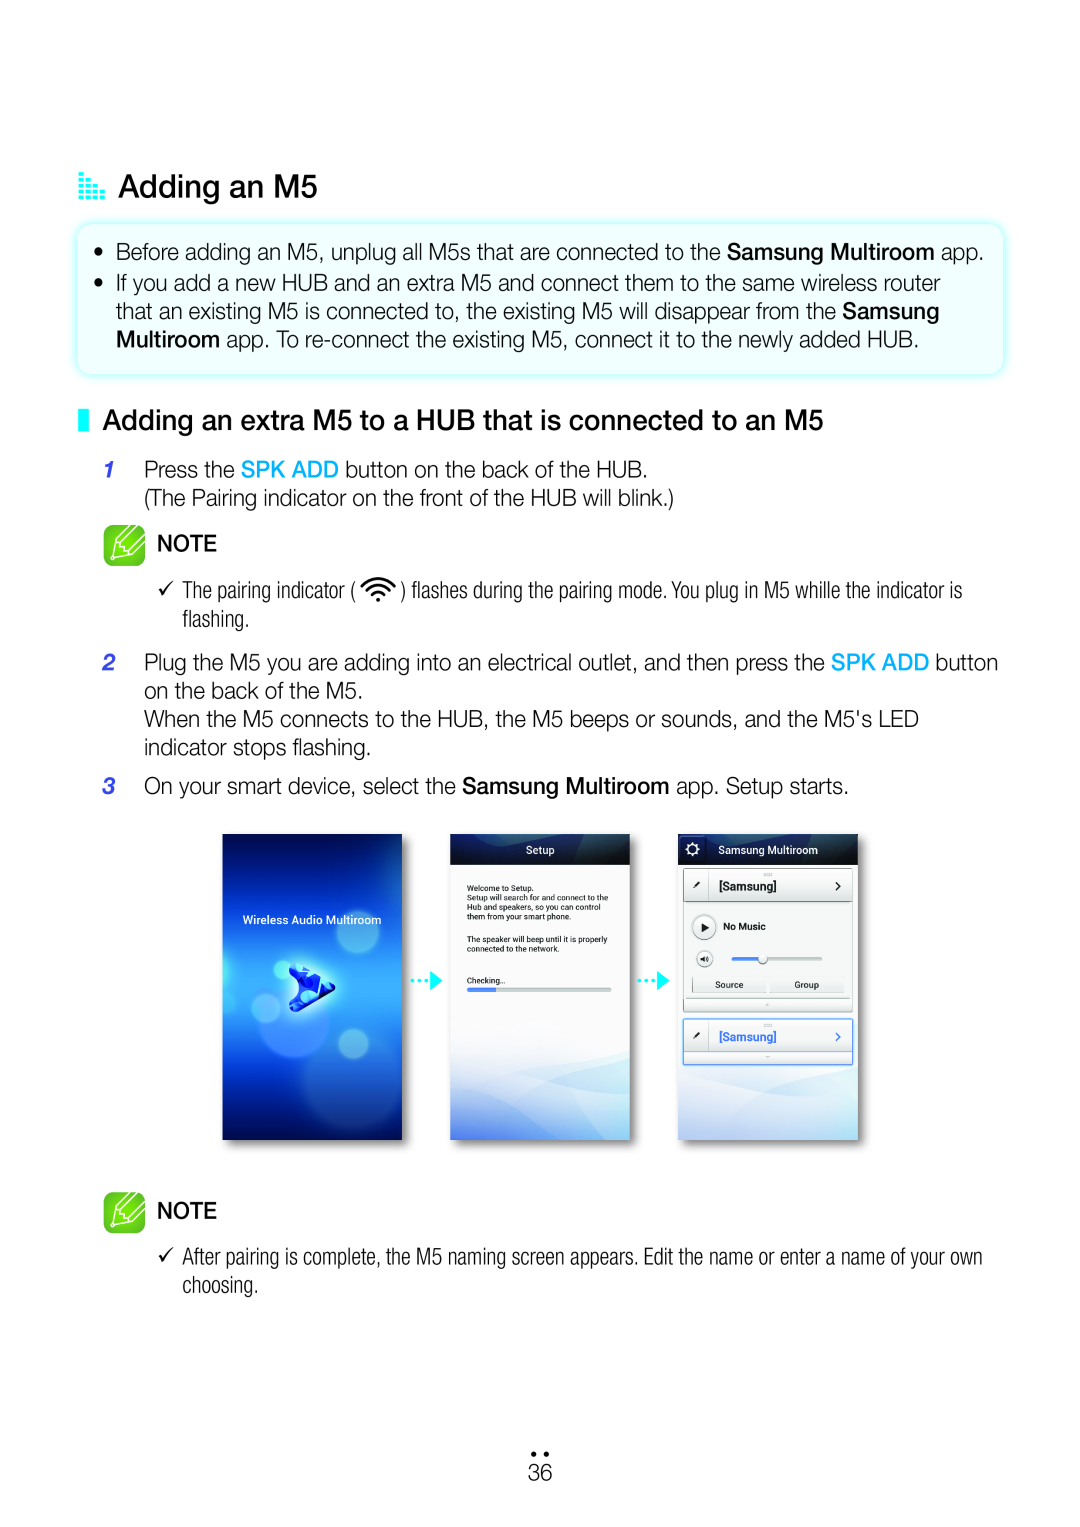 Samsung user manual AA Adding an M5, Adding an extra M5 to a HUB that is connected to an M5 